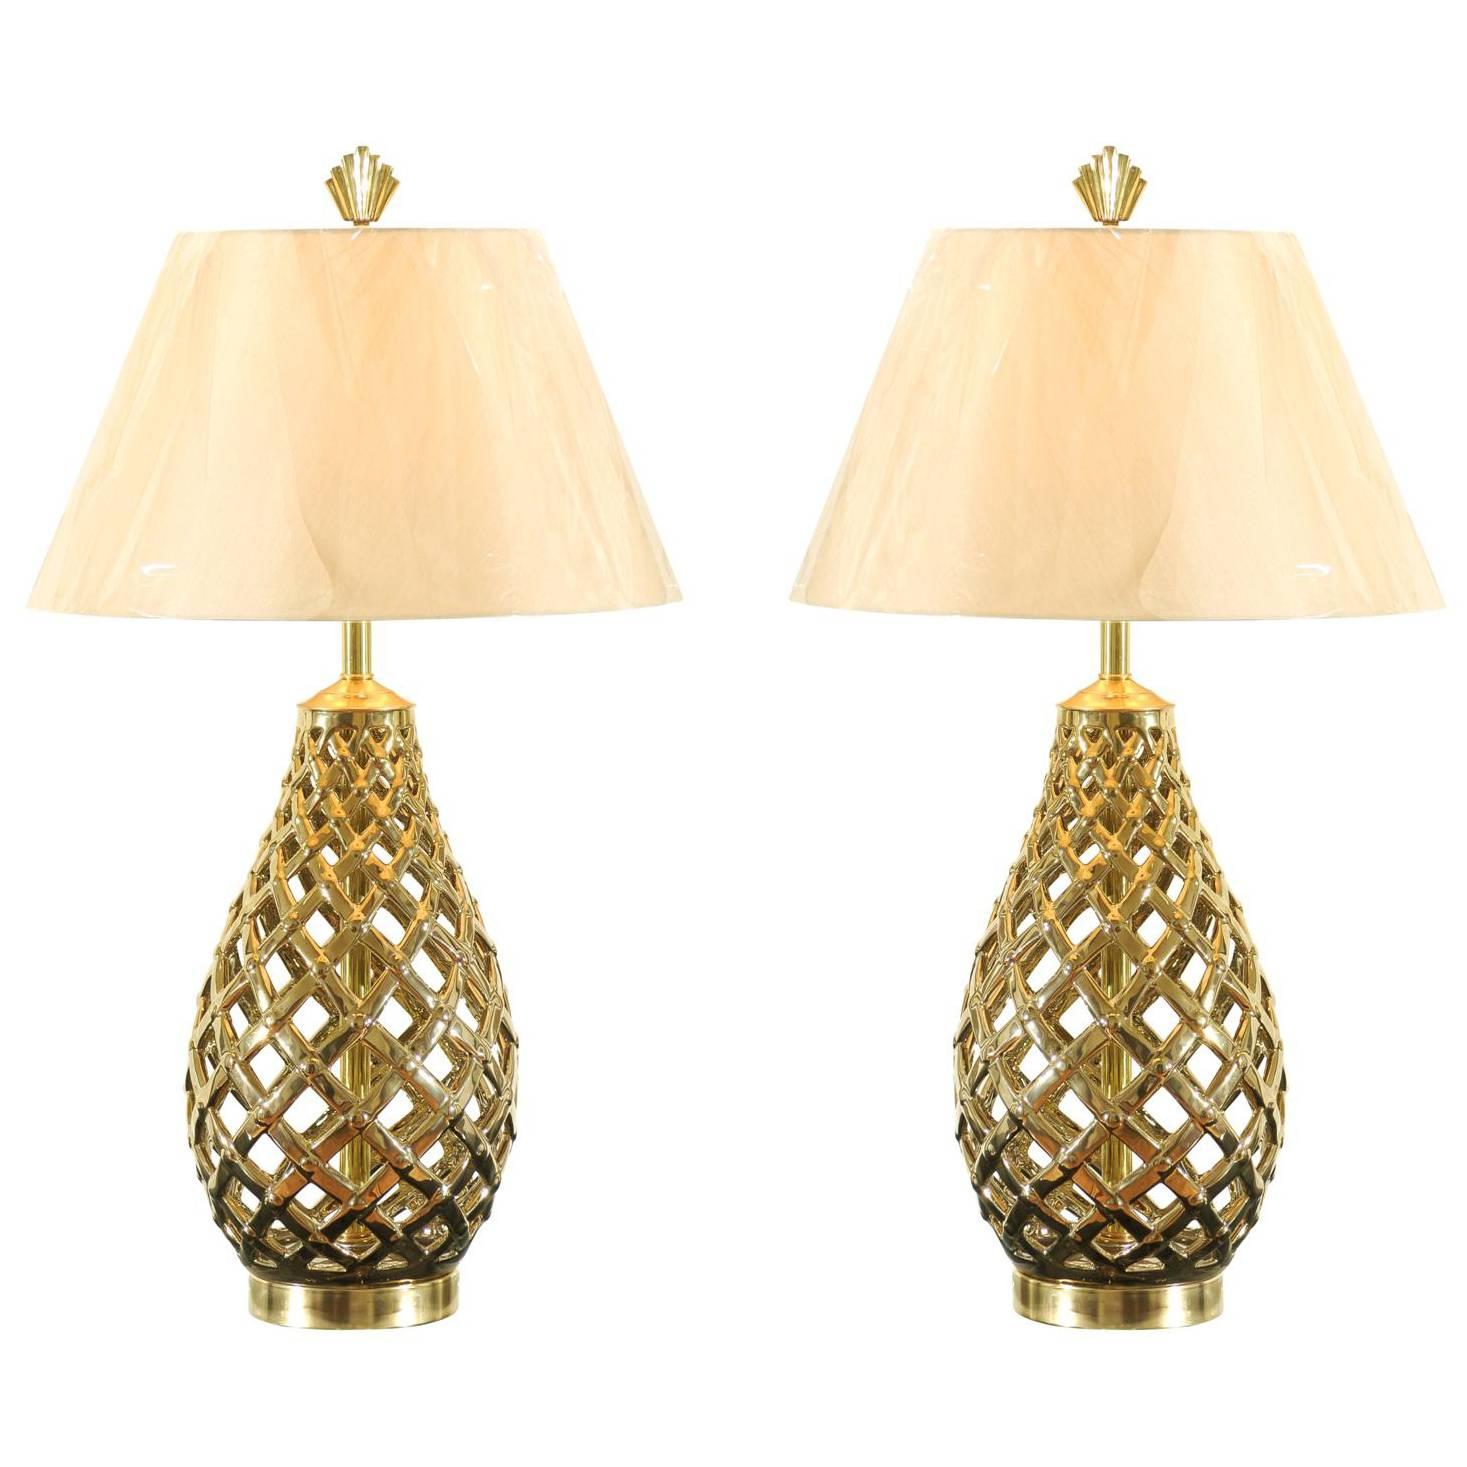 Lovely Restored Pair of Pierced Ceramic, Brass and Lucite Lamps For Sale